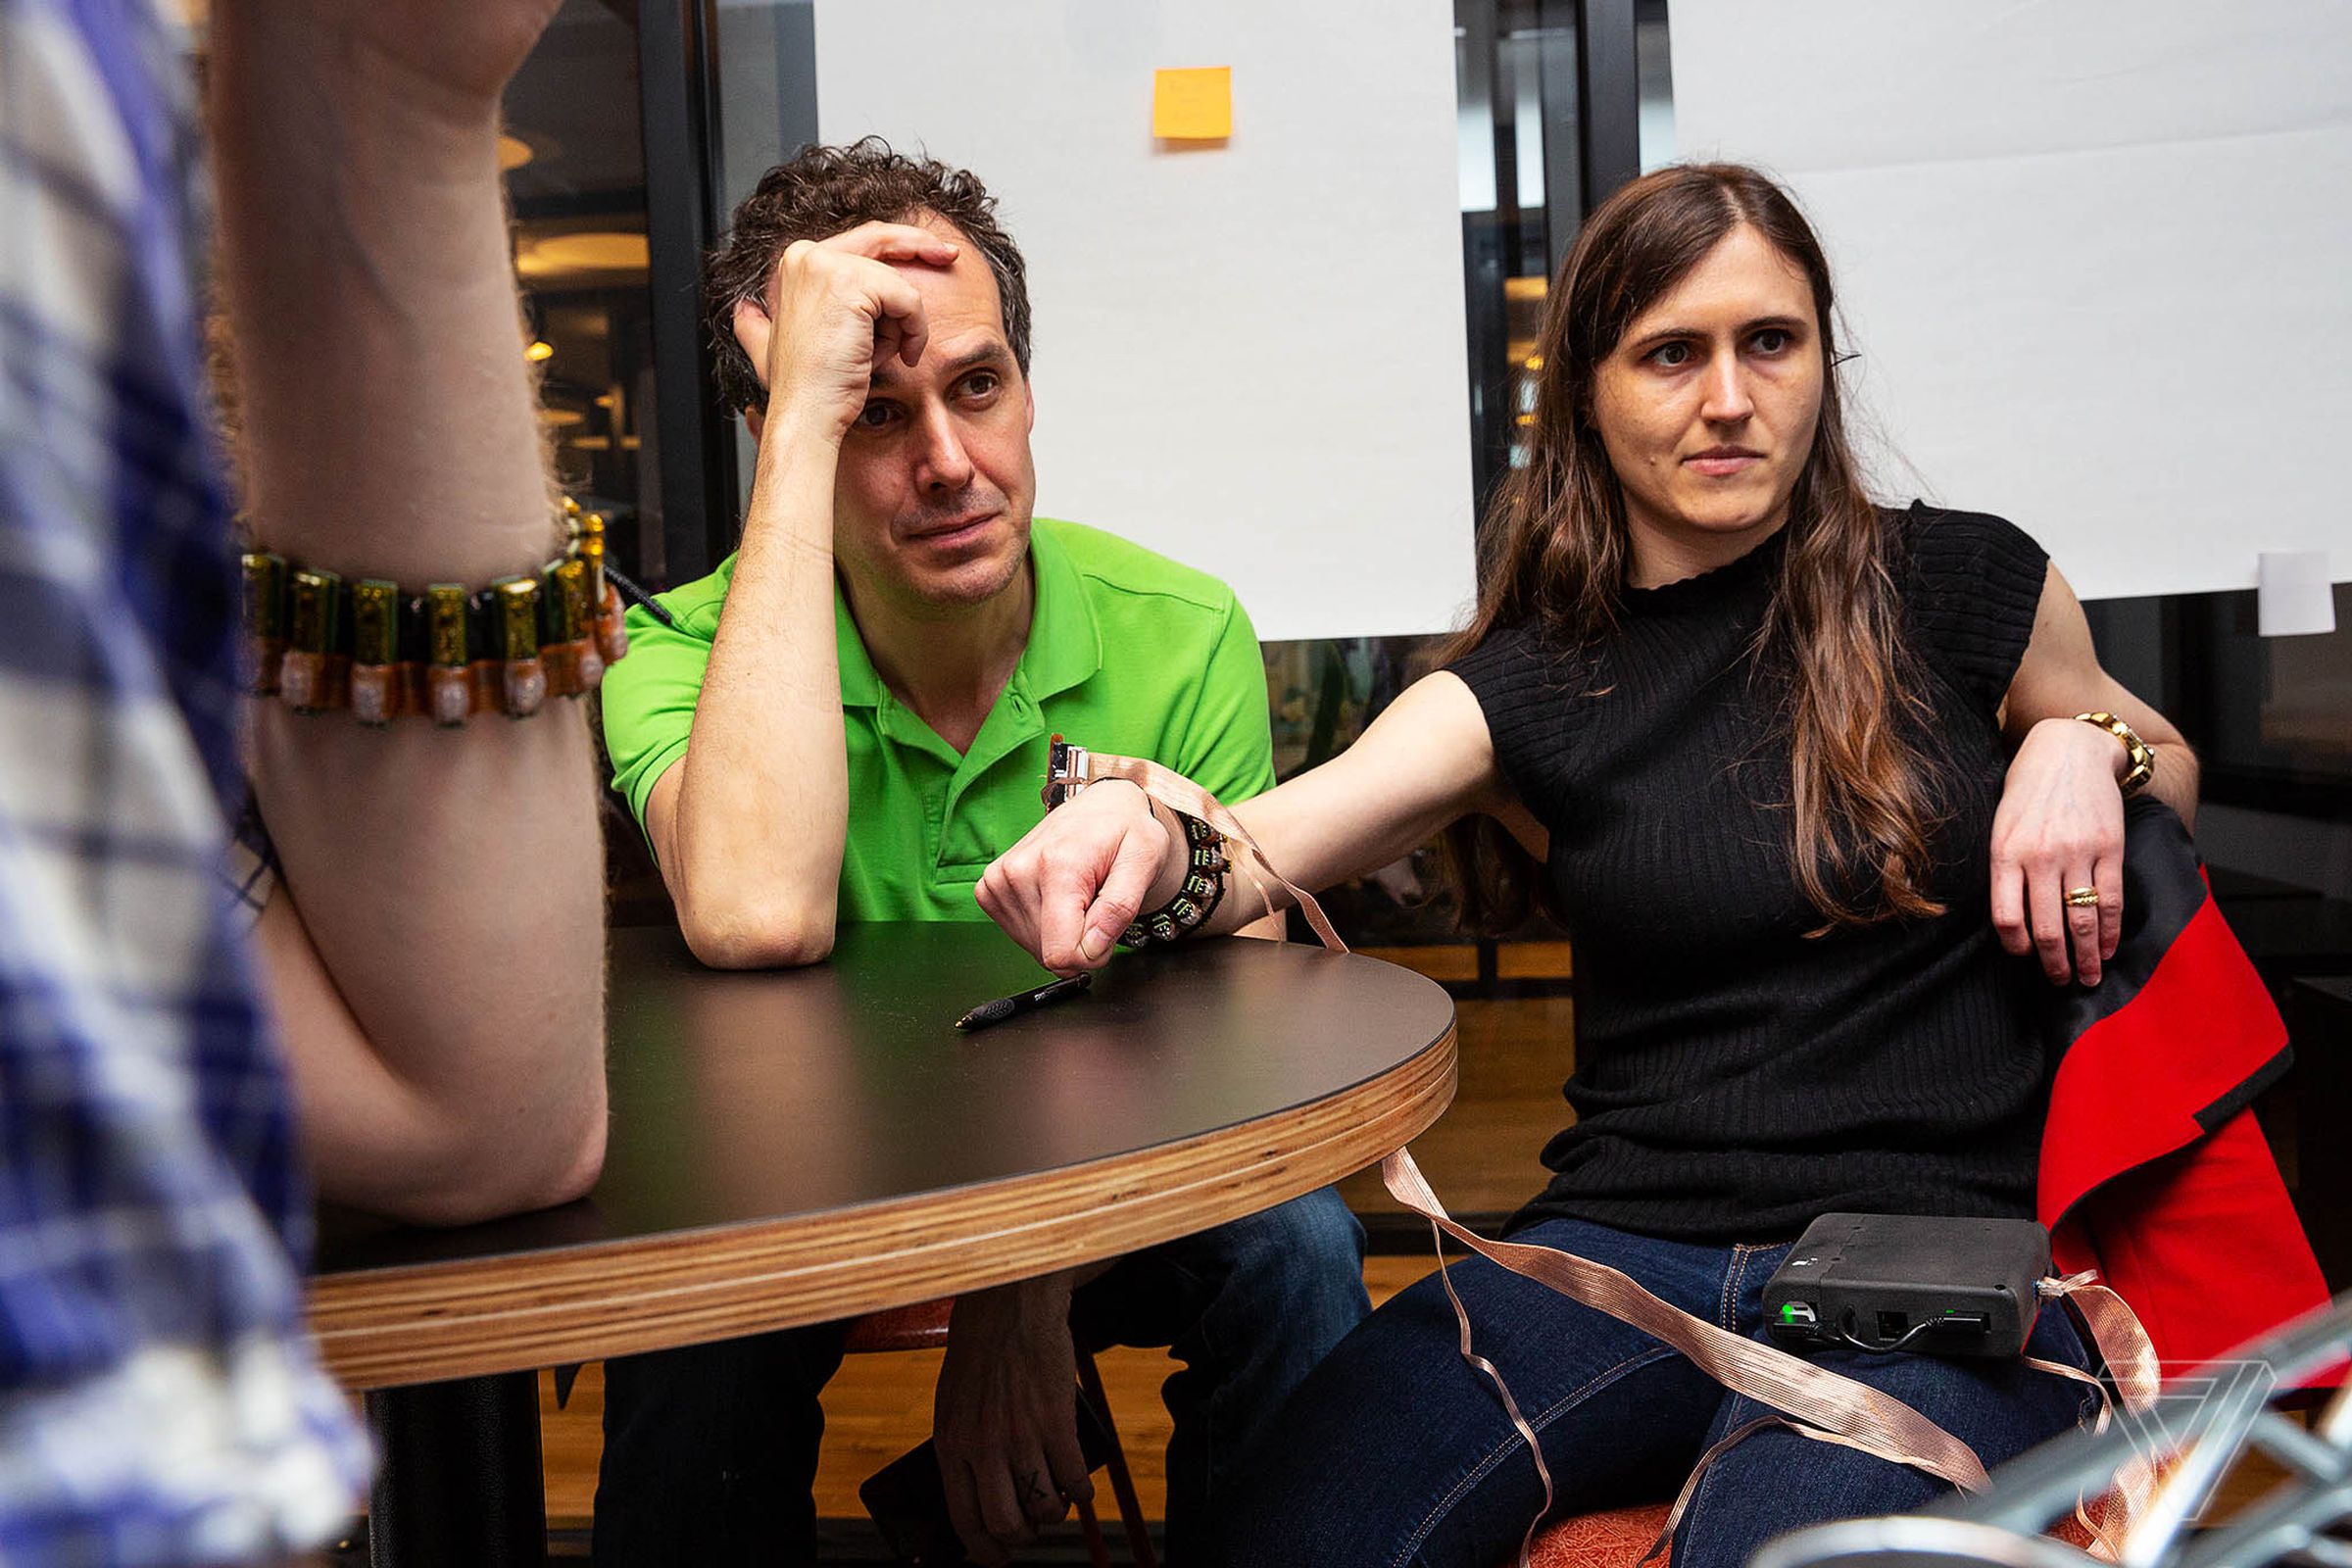 Using CTRL-Labs’ wristband prototype required intense concentration, but not actual muscle movement. CEO Thomas Reardon, left, led development of the Internet Explorer browser before co-founding CTRL-Labs in 2015. 